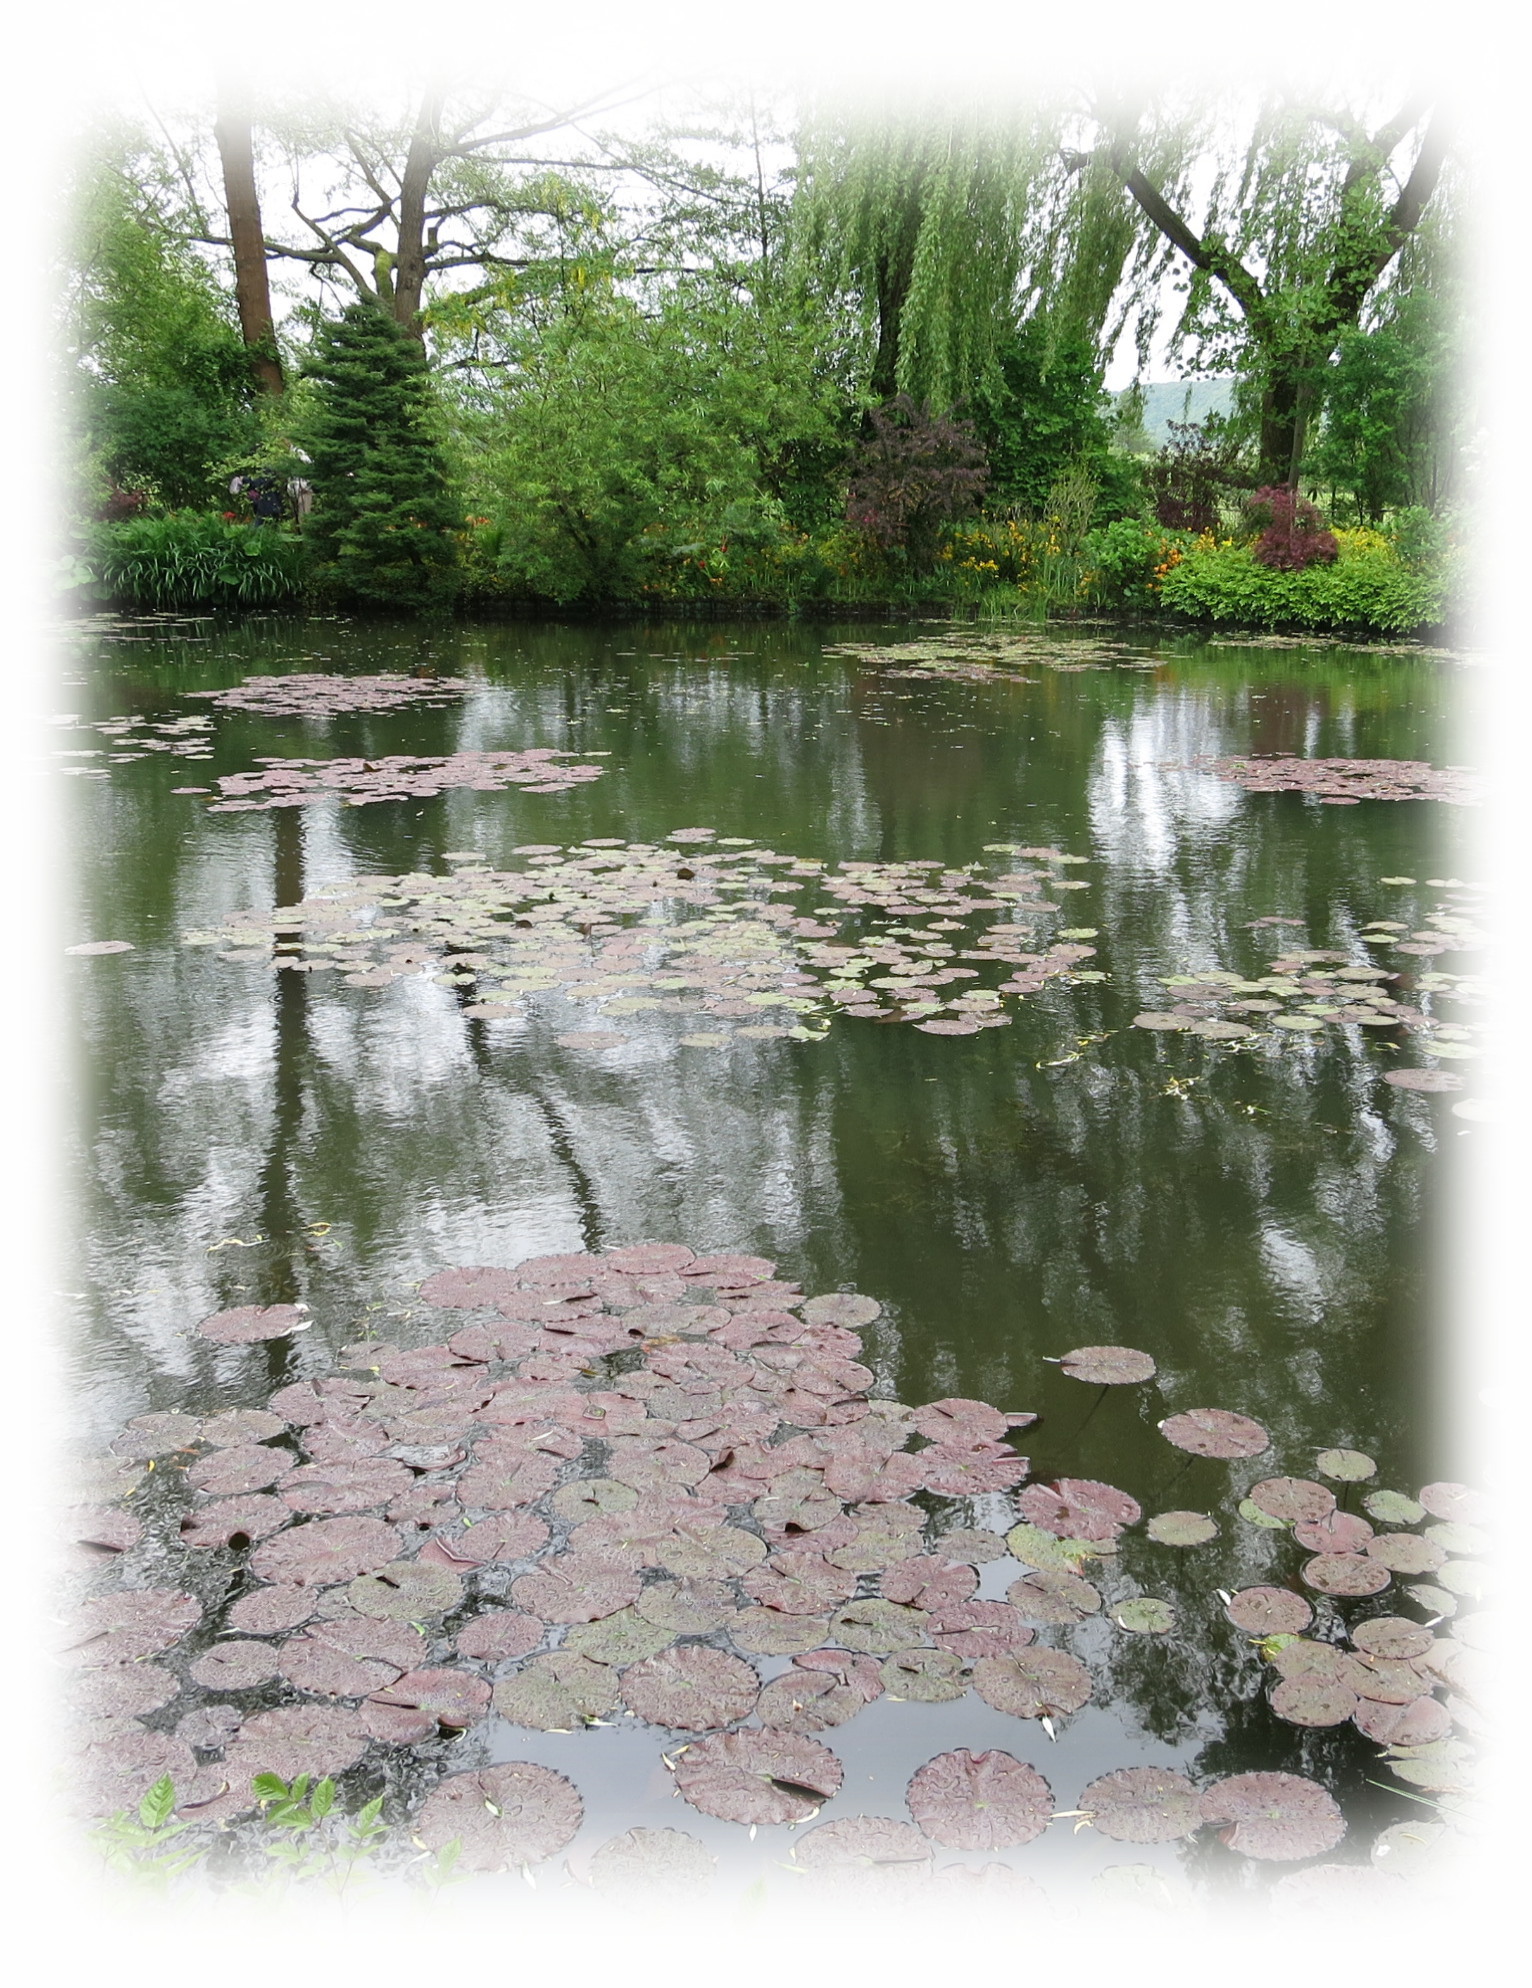 Claude Monet's Water garden at Giverny.